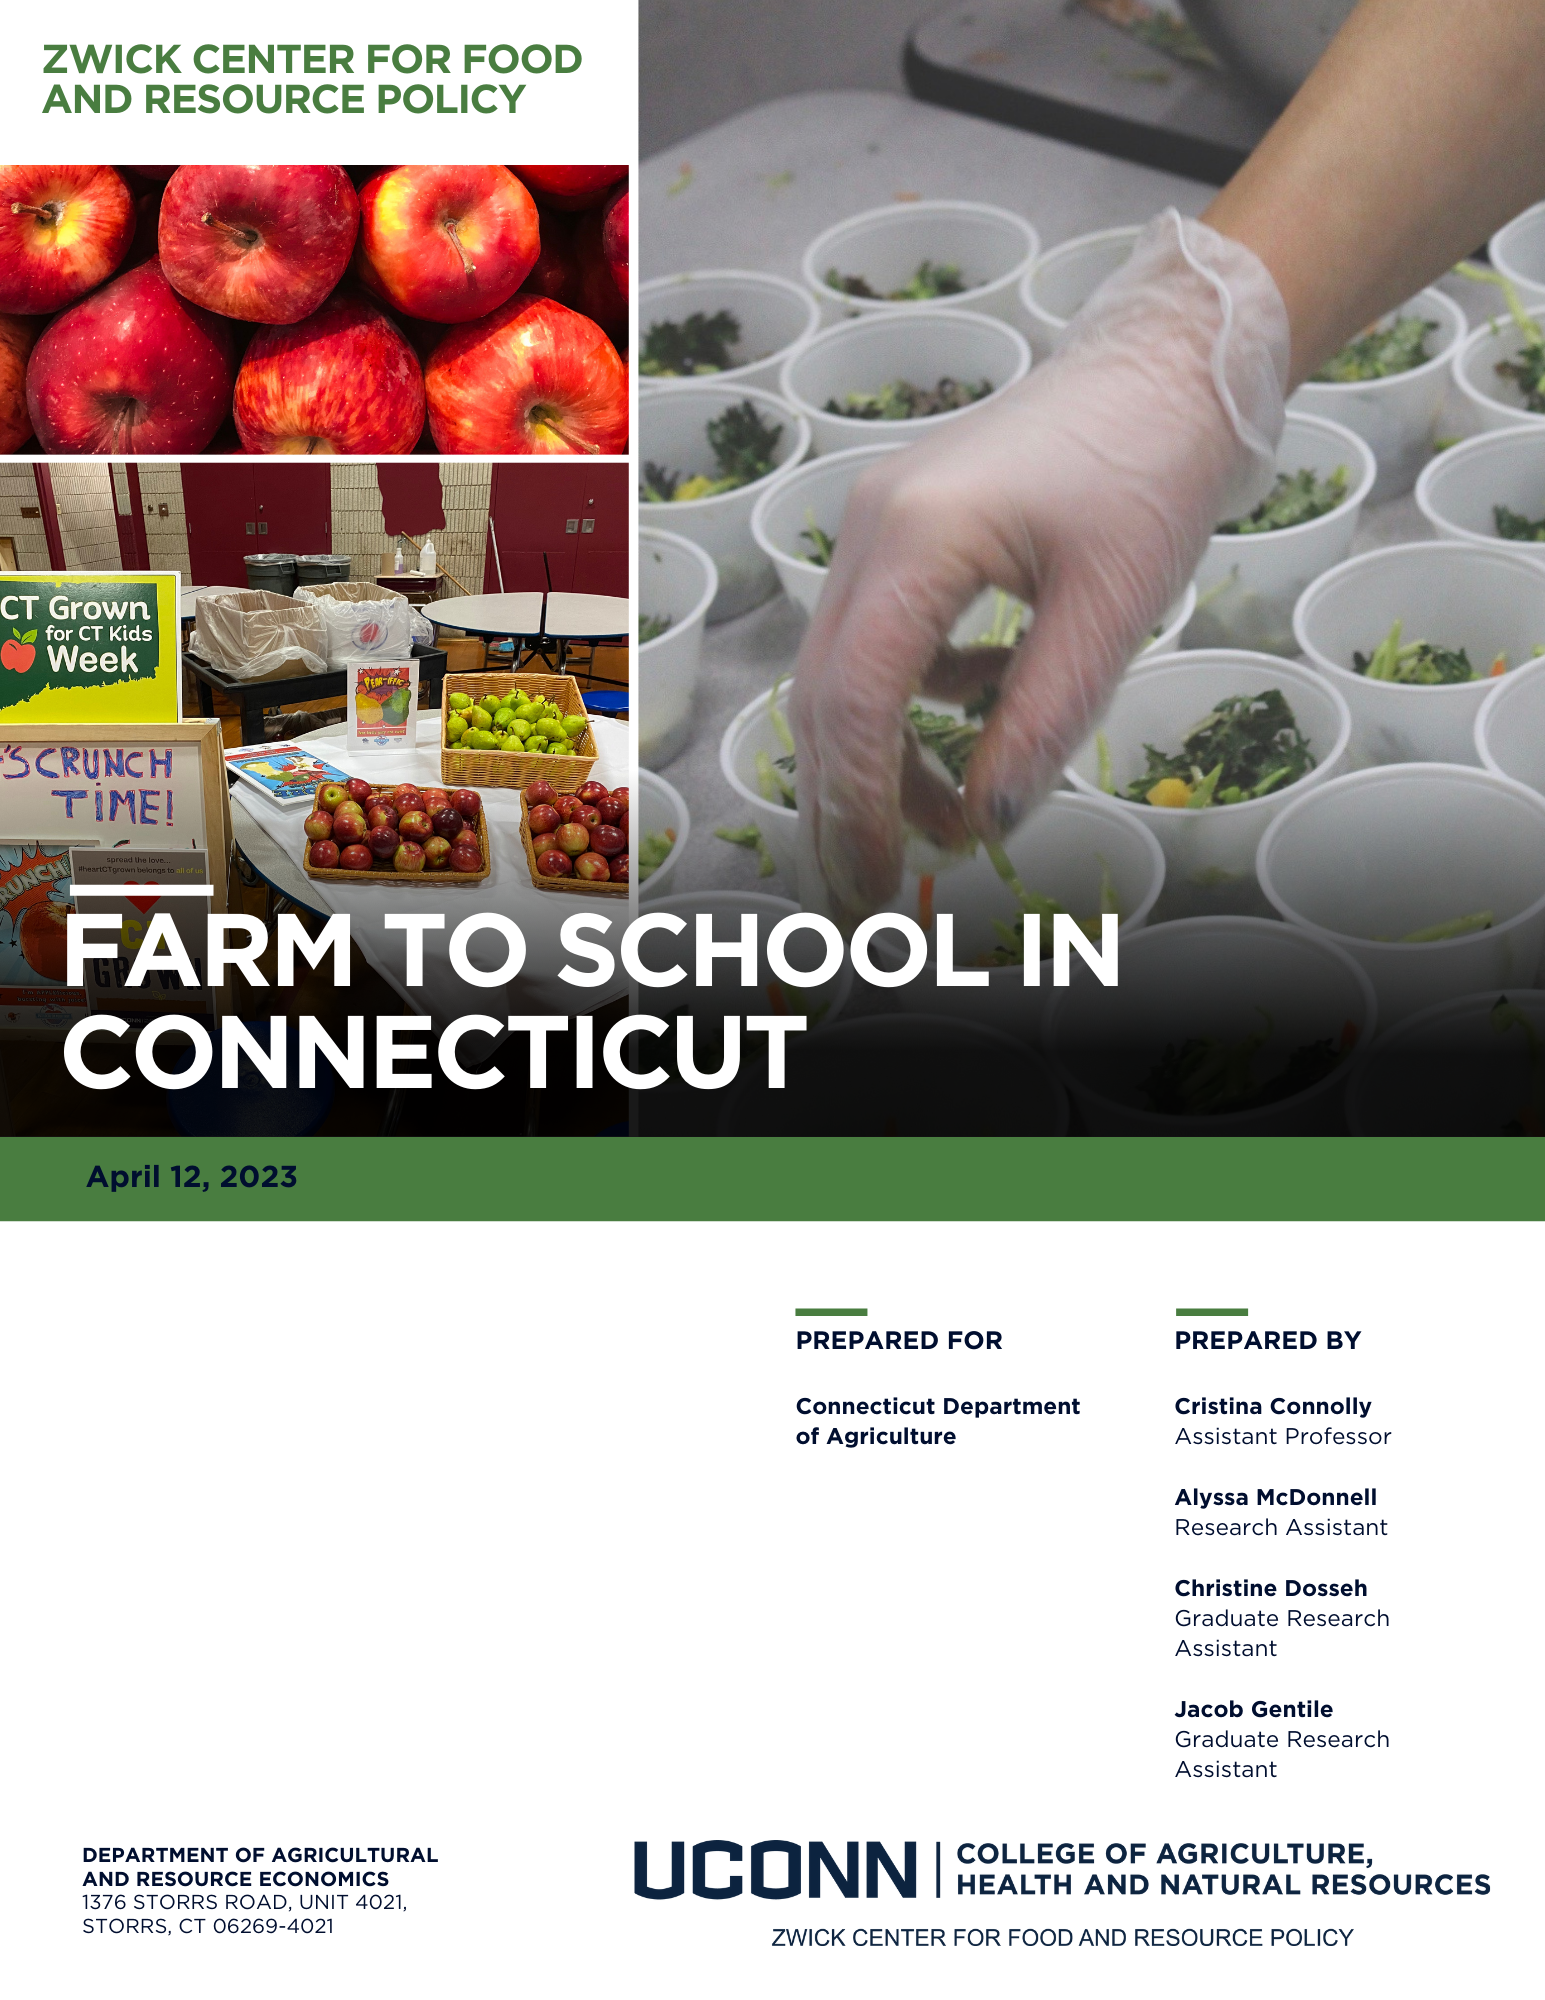 Zwick Center for Food and Resource Policy: Farm to School in Connecticut